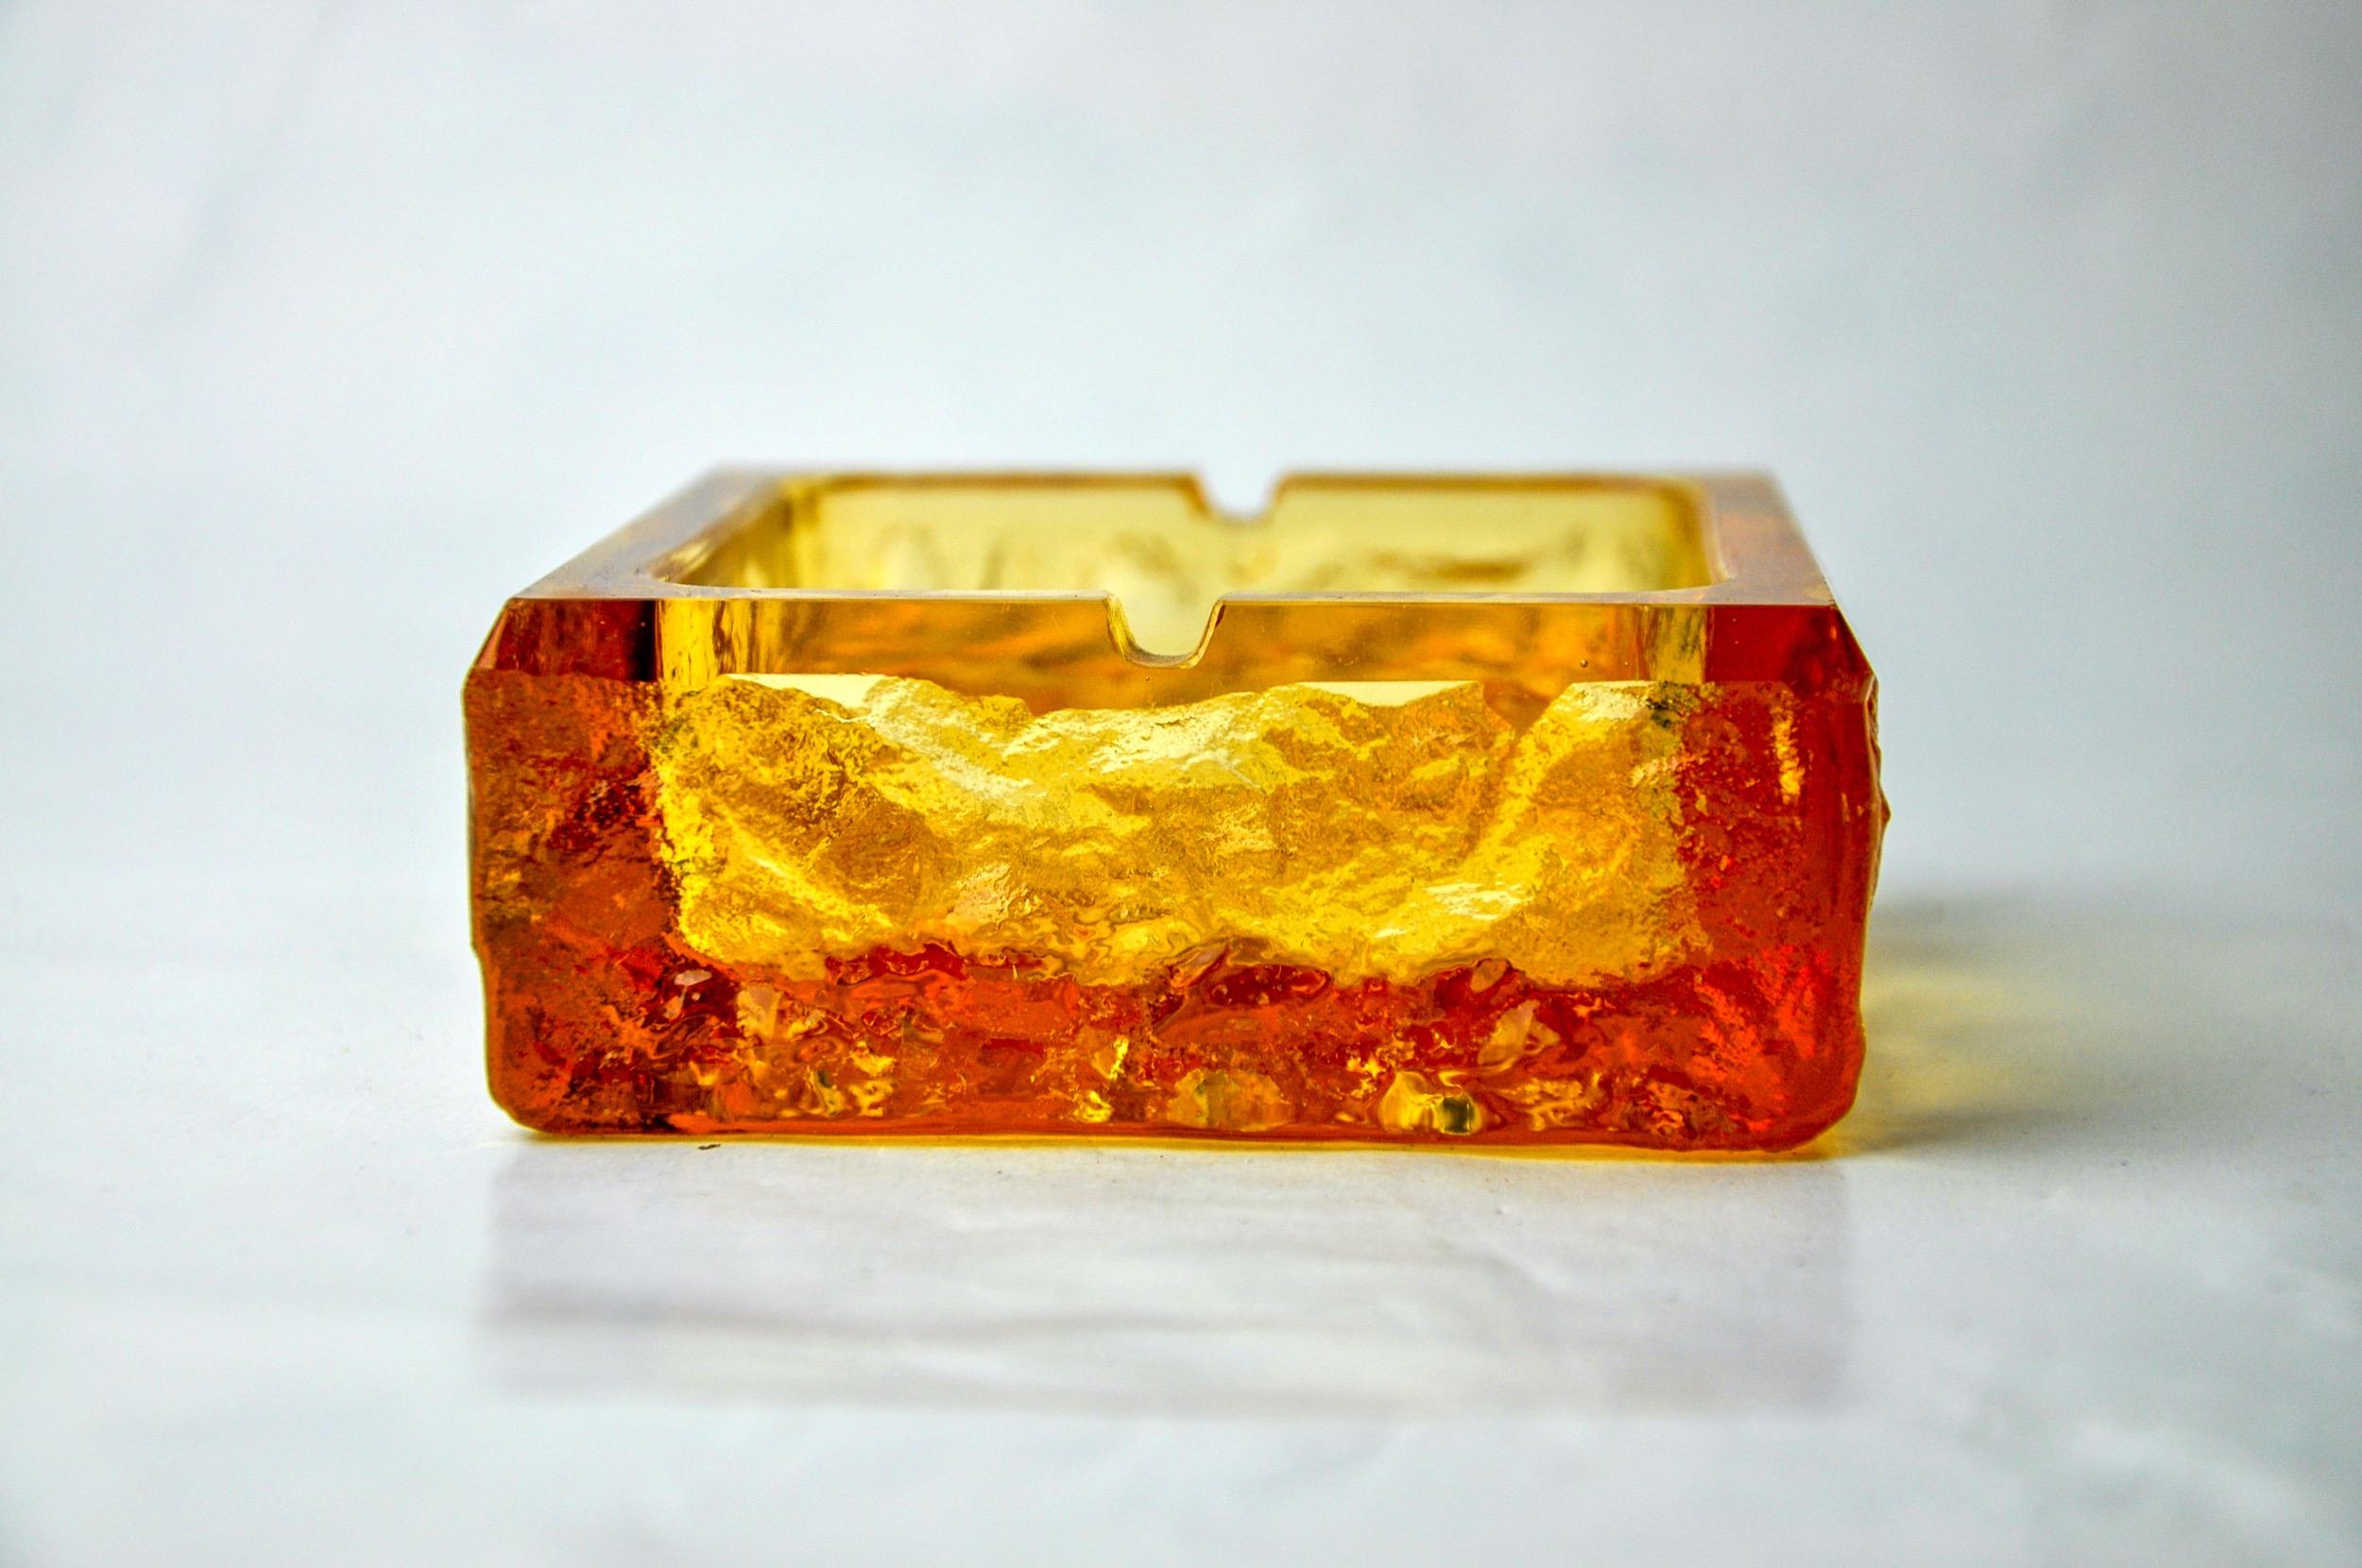 Superb and rare ice cube ashtray designed and produced by antonio imperatore in italy in the 1970s. Ashtray in orange frosted effect murano glass handcrafted by venetian master glassmakers. Decorative object that will bring a real design touch to